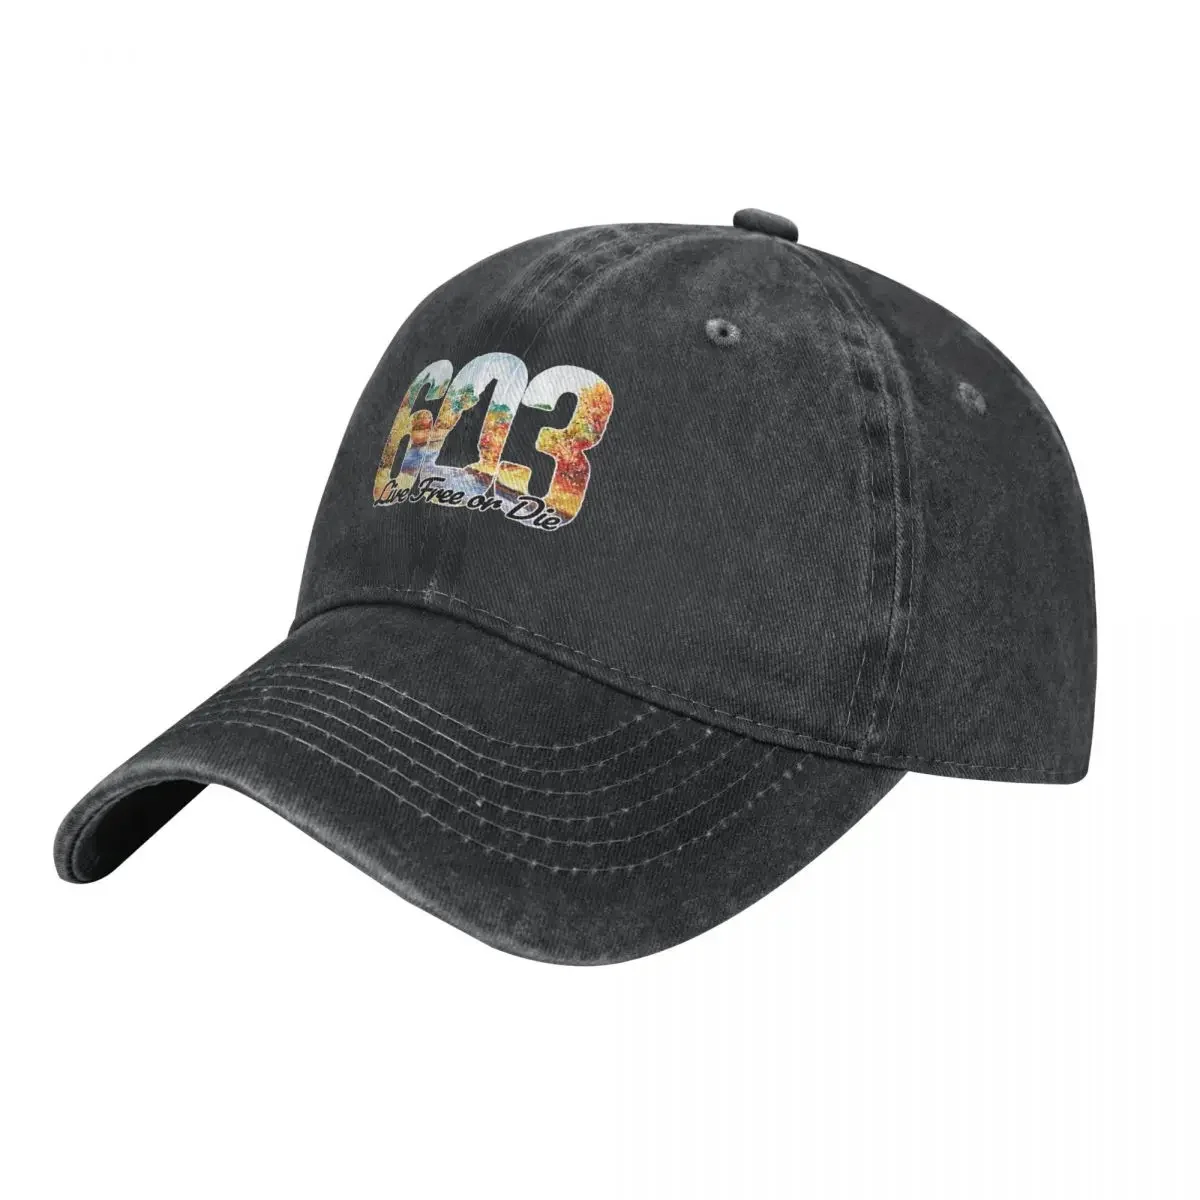 

603 NH Live Free or Die - New Hampshire Autumn Watercolor Foliage Cowboy Hat Golf Hat Hat Baseball Cap For Women Men's